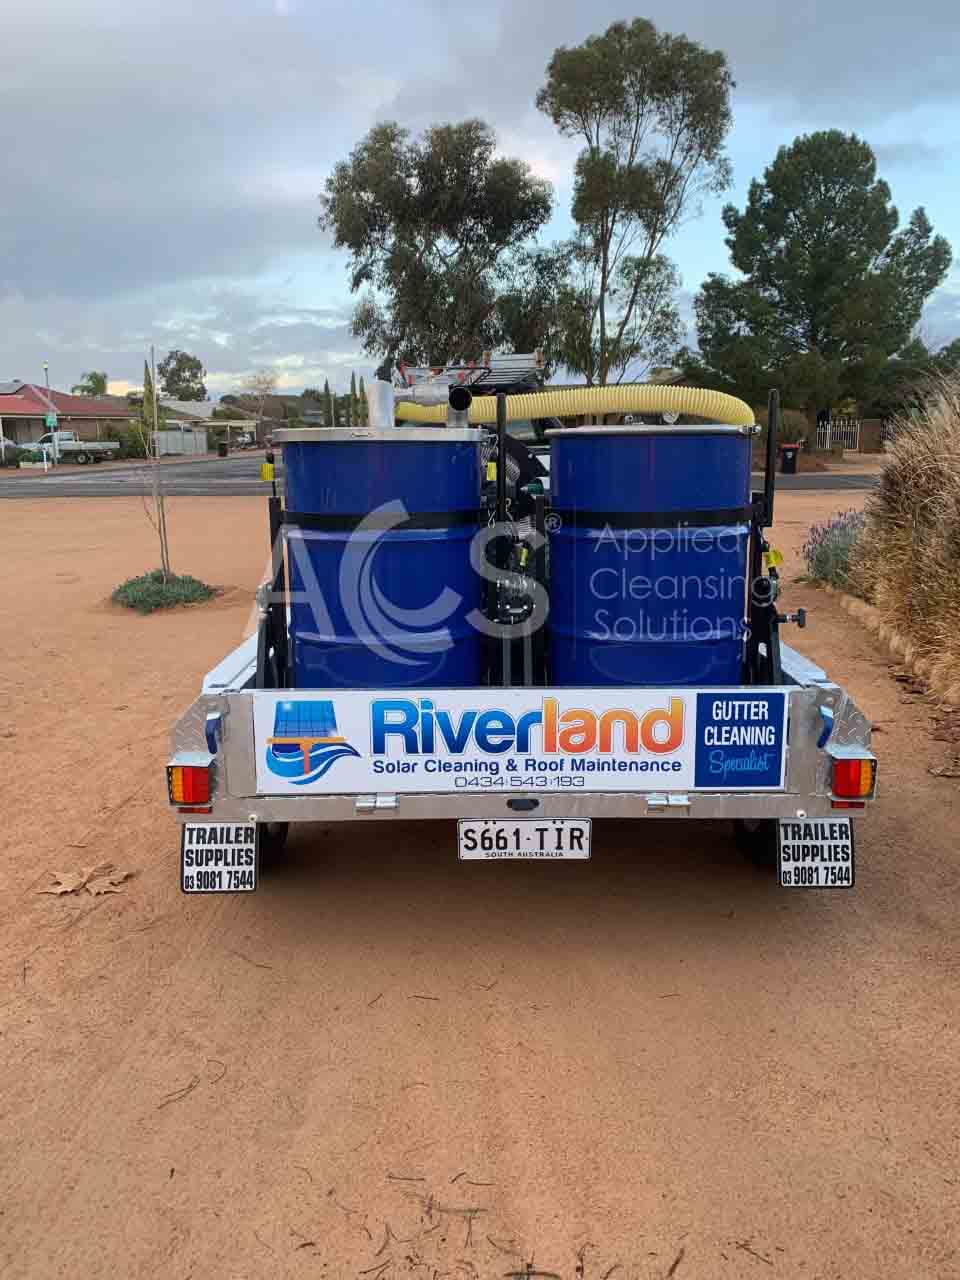 DUAL DRUM TIPPER SET UP Riverland solar cleaning 2050